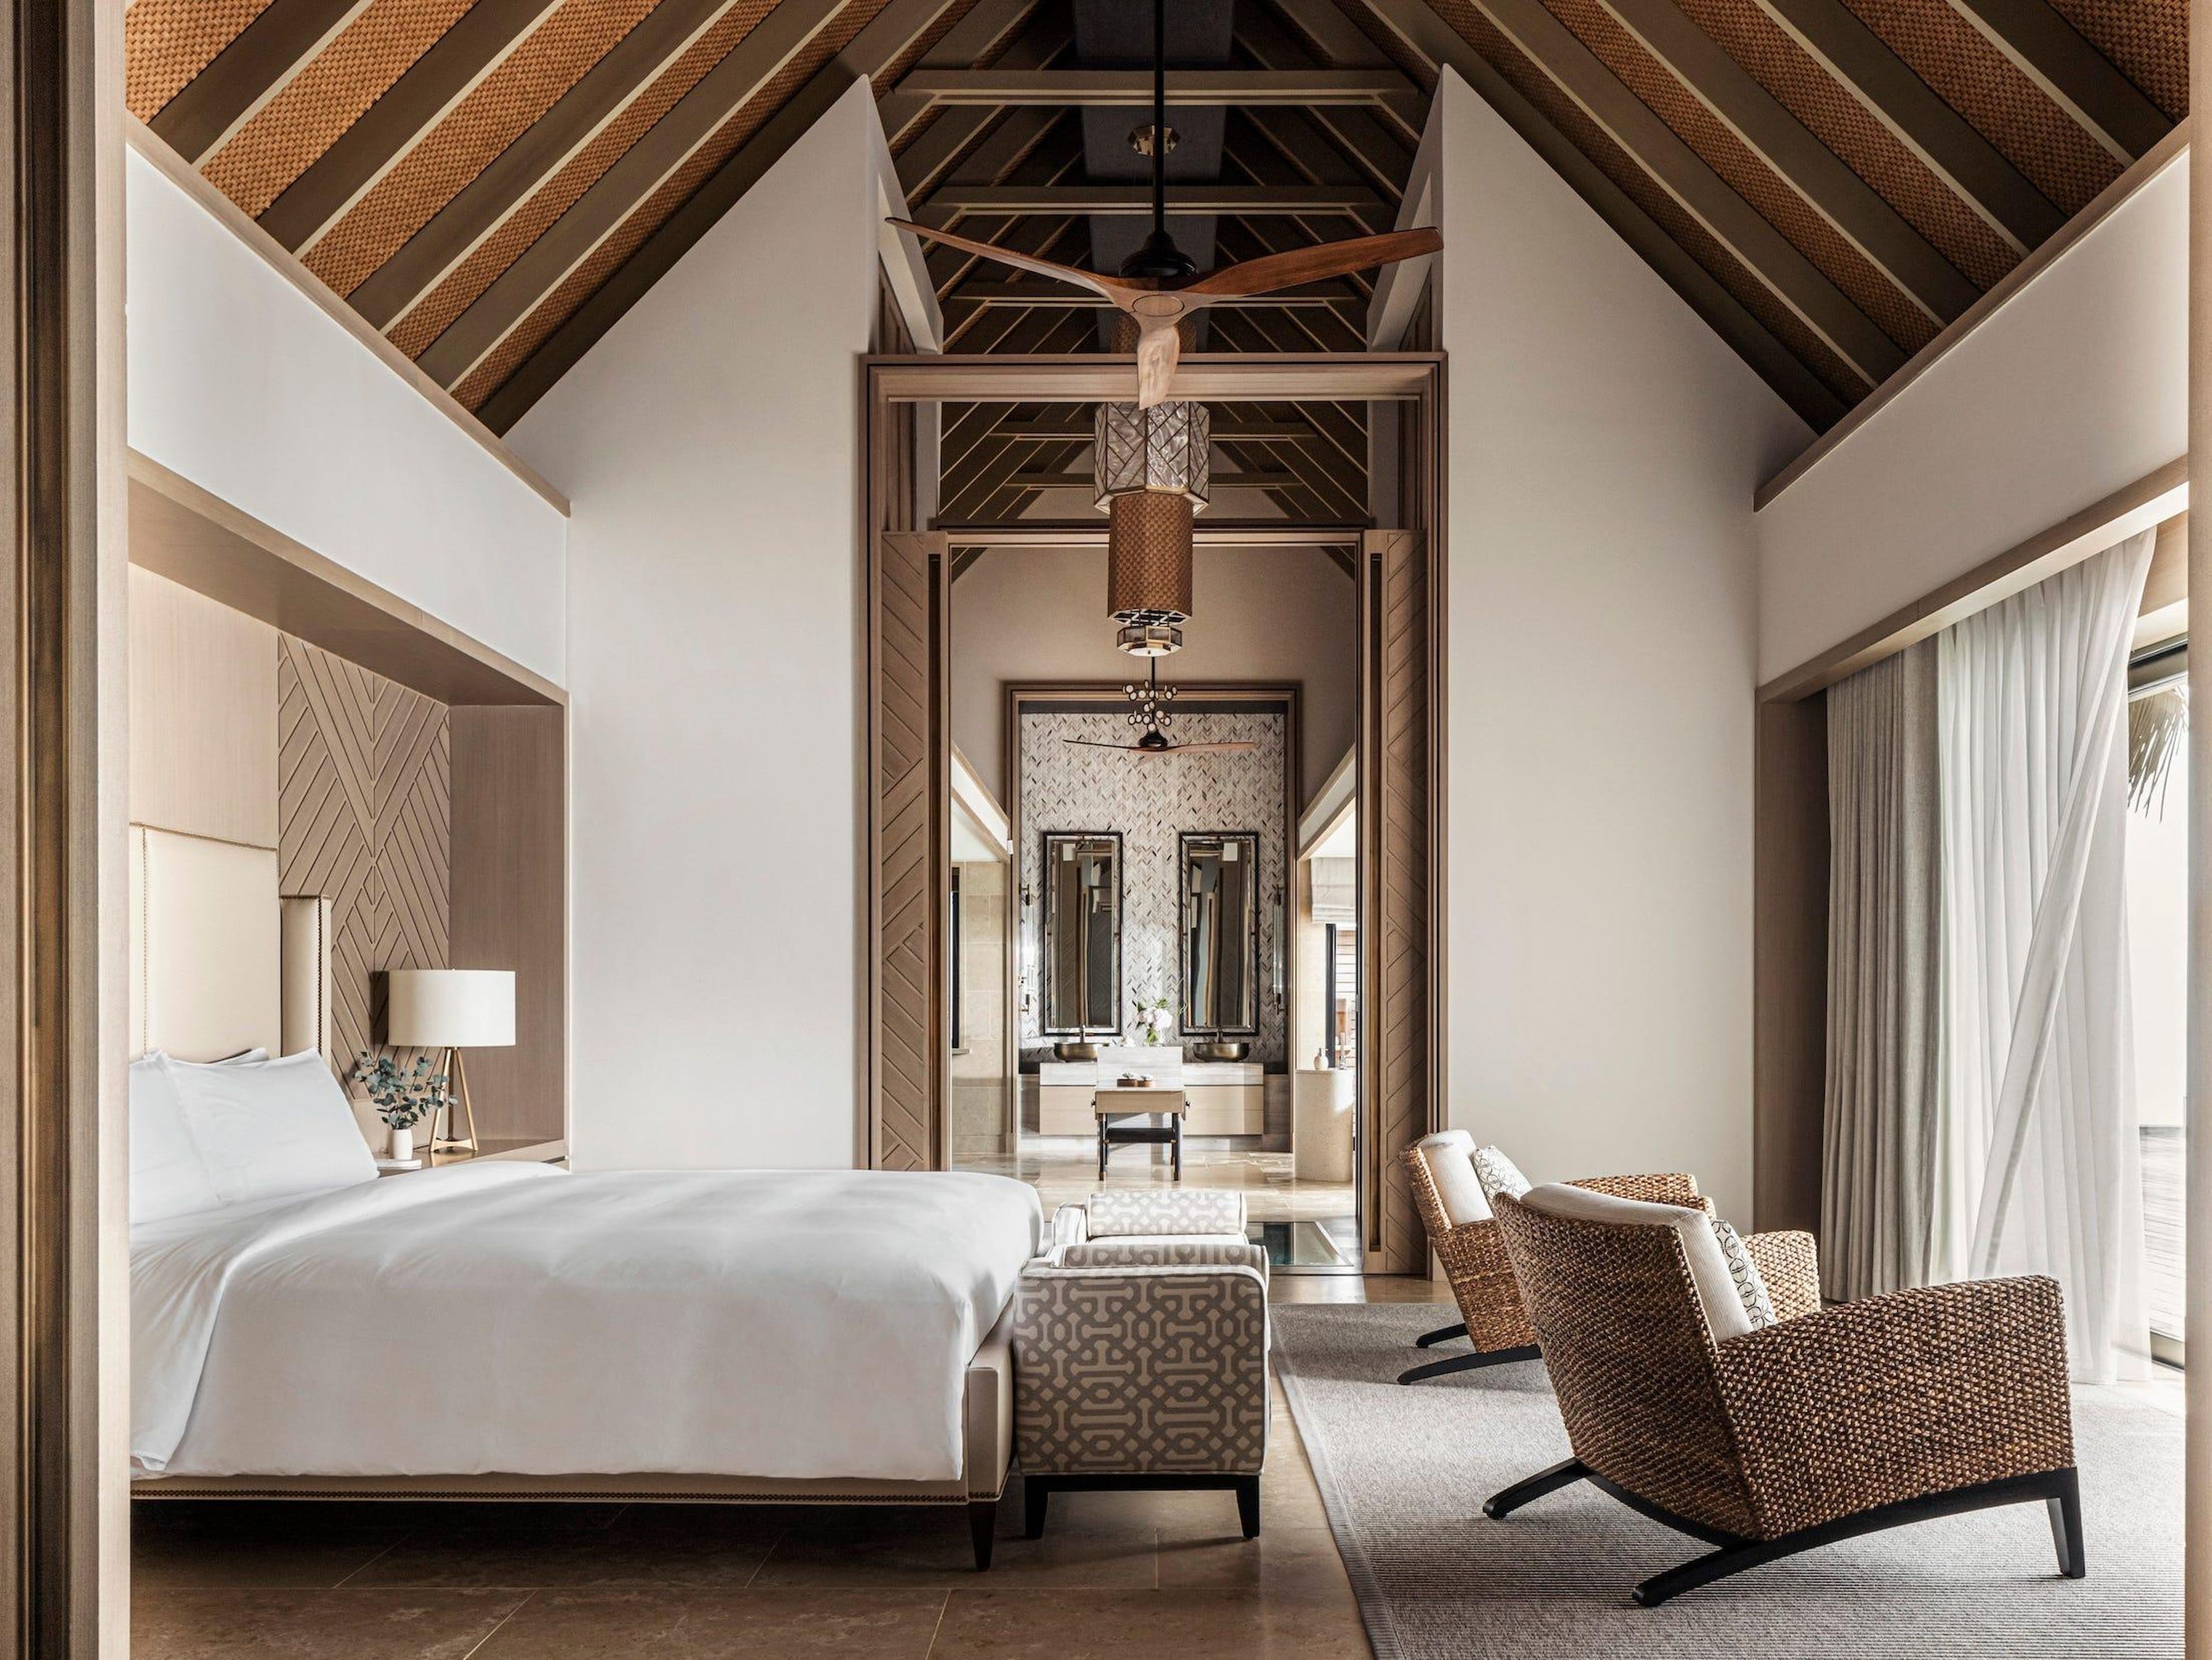 The two-bedroom villa at Waldorf Astoria's Ithaafushi private island in the Maldives.